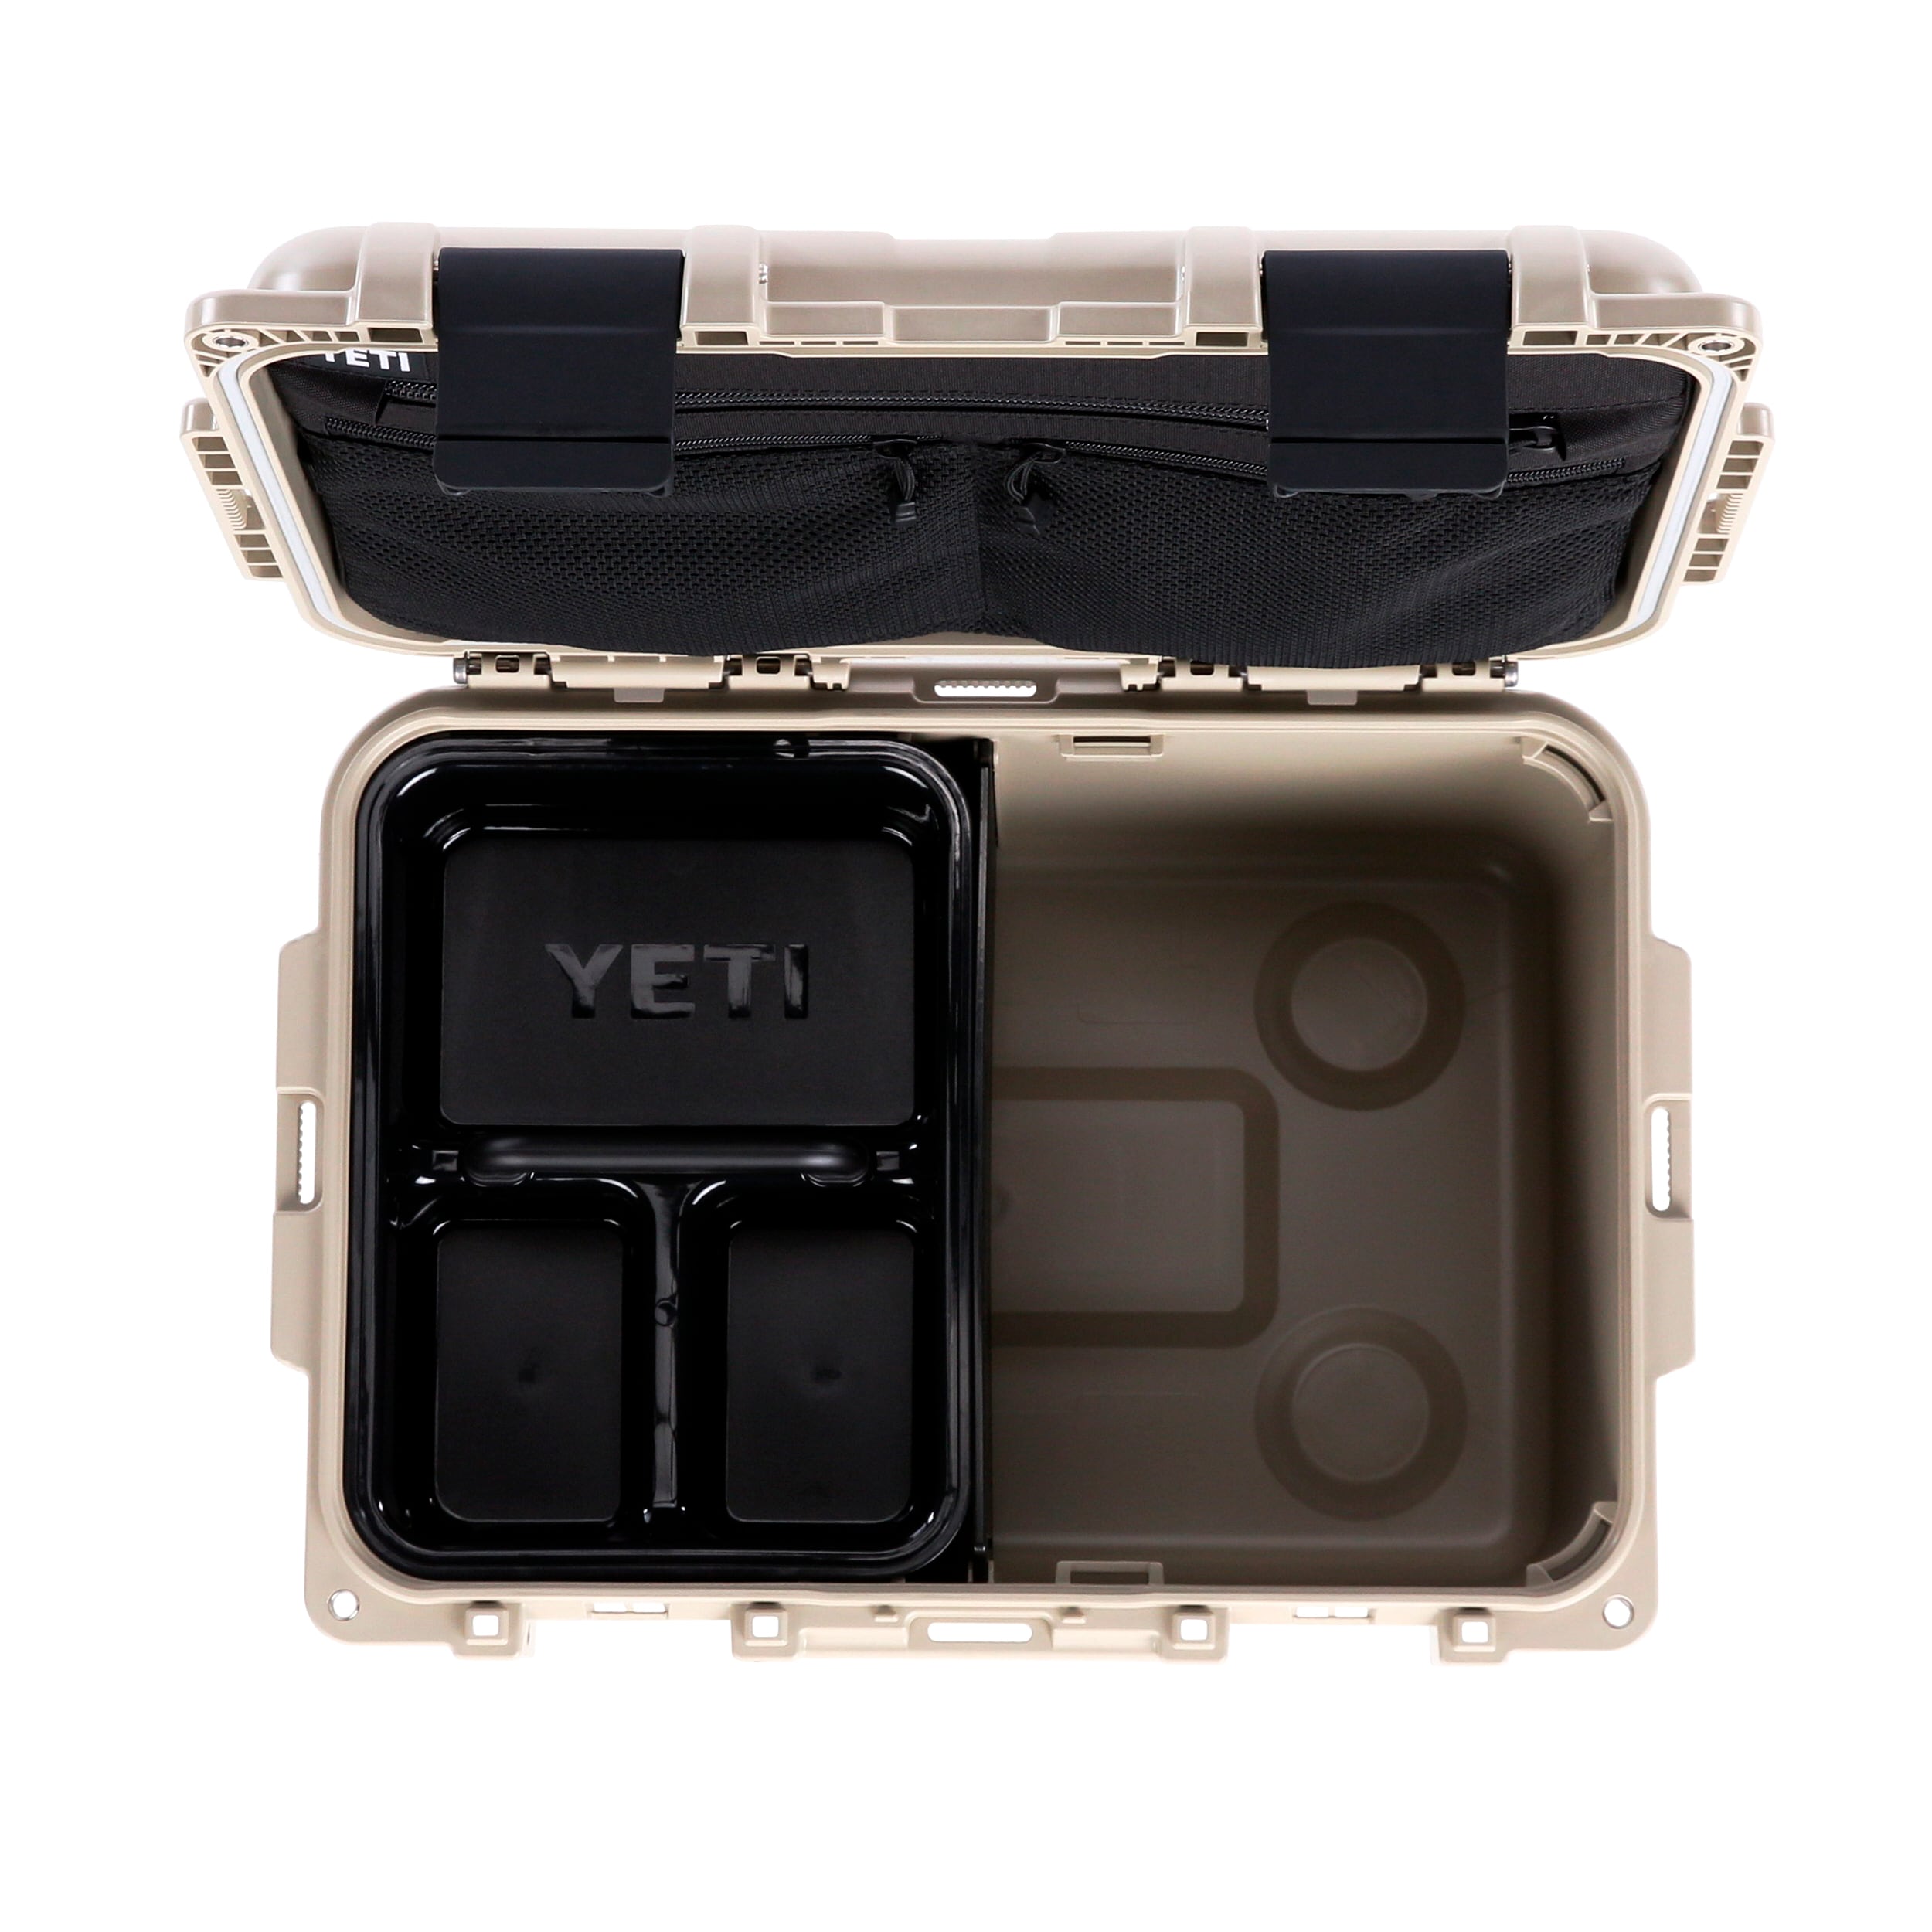 YETI LoadOut GoBox 30, Tan in the Gear Storage & Containers